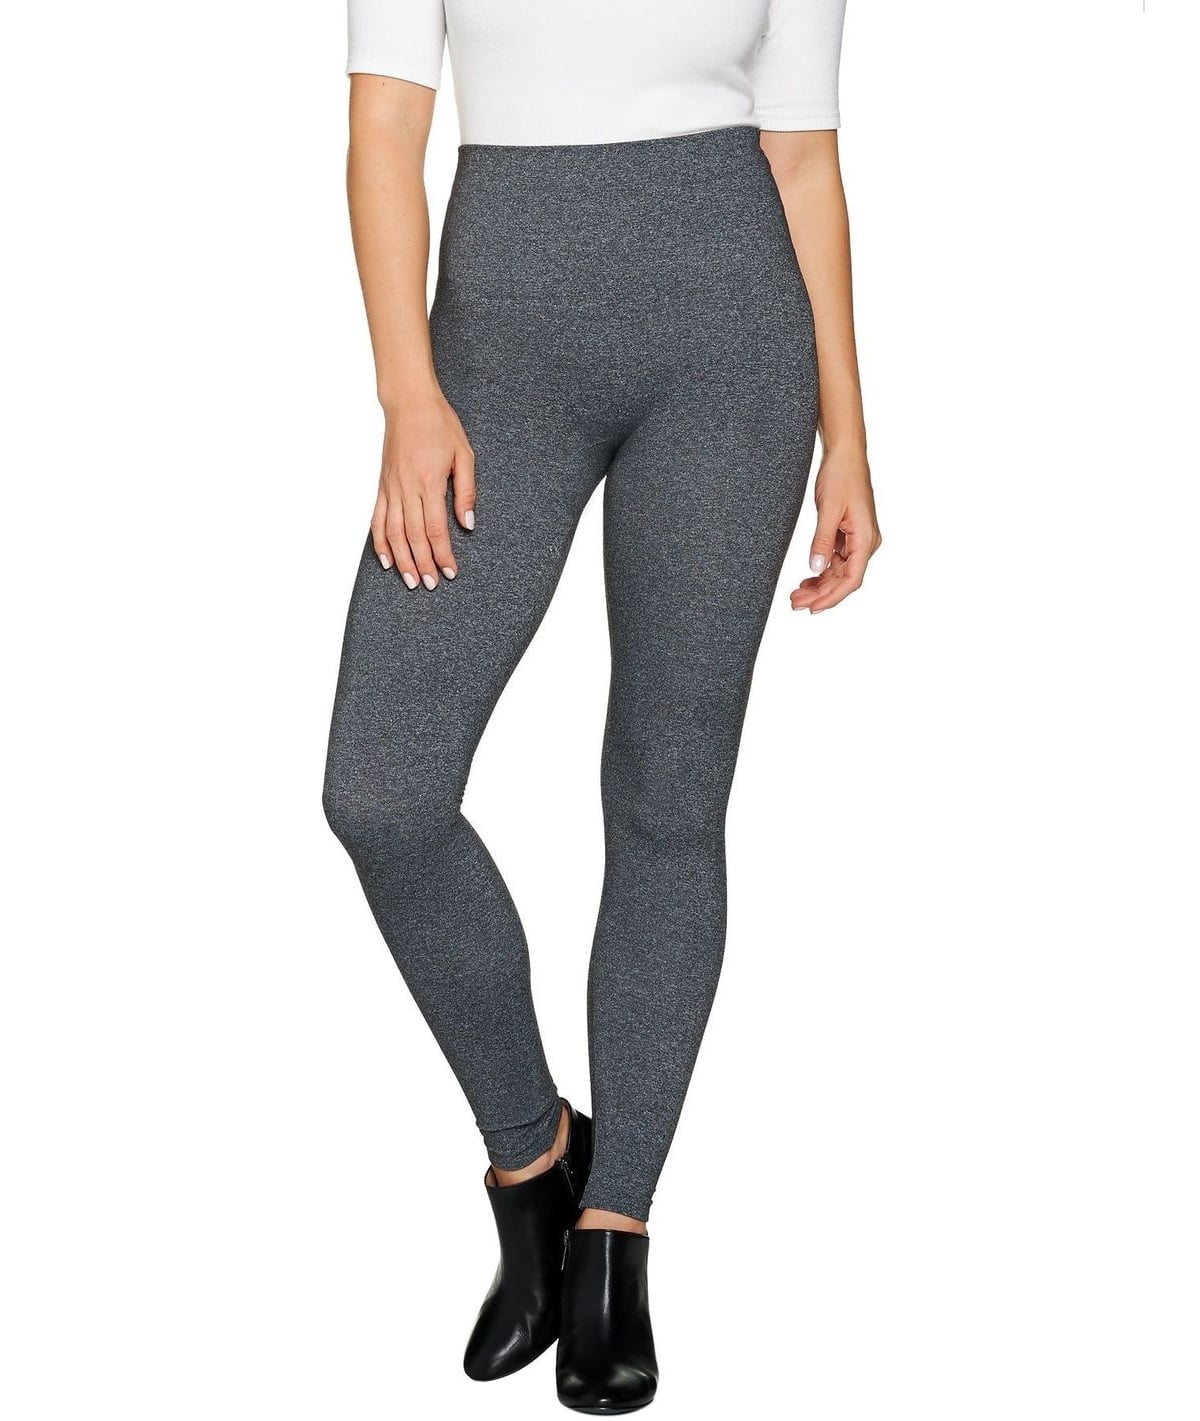 Spanx Look Me Now Seamless Leggings A288131 